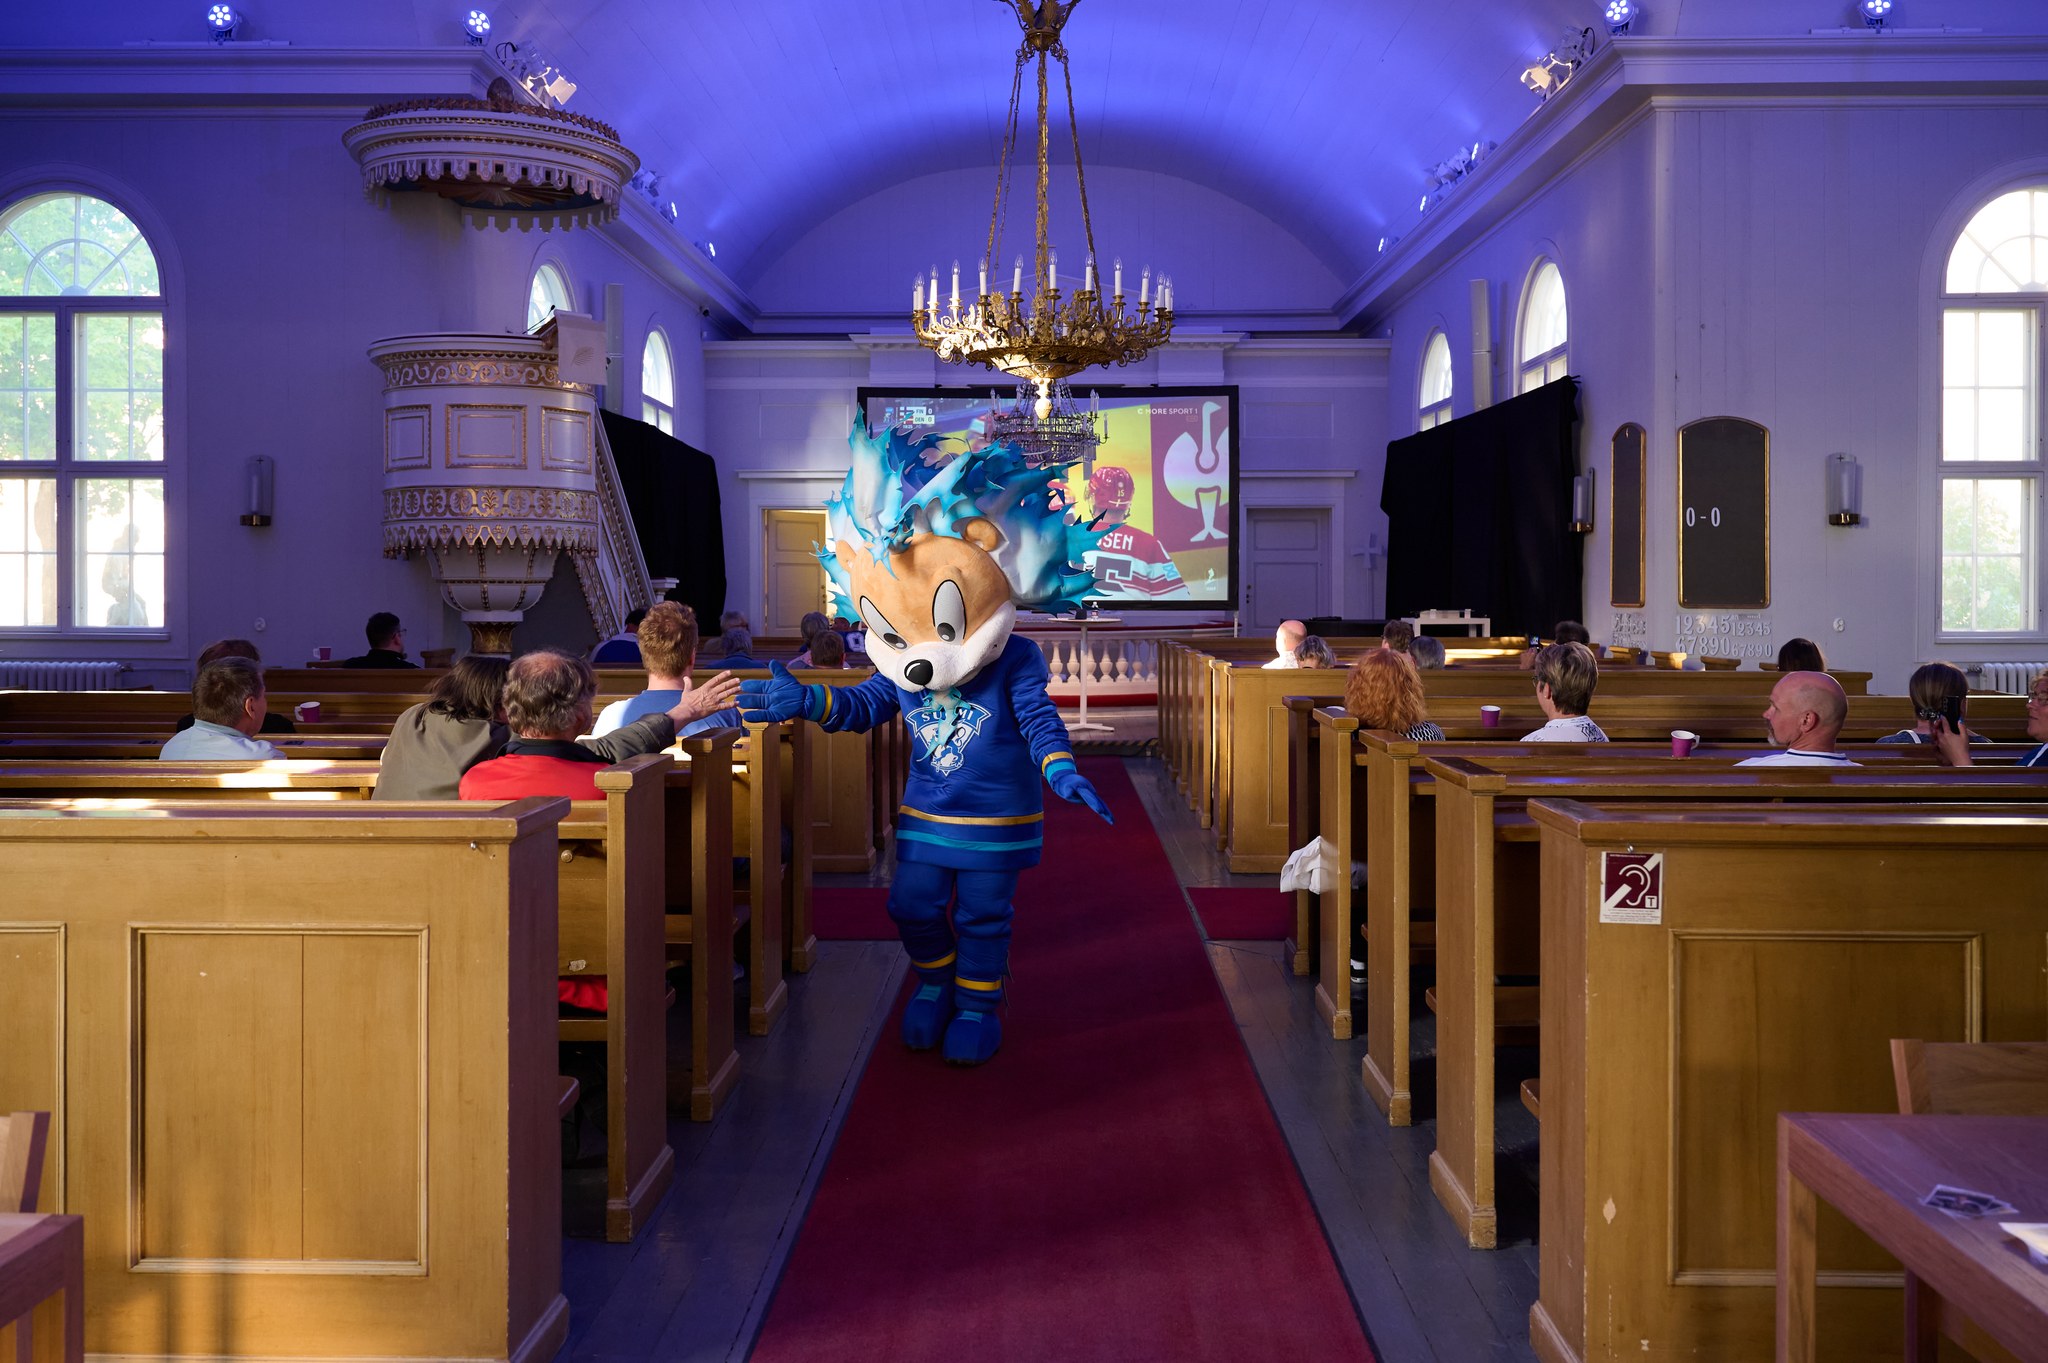 Finnish hockey mascot in church where they are screening a game.